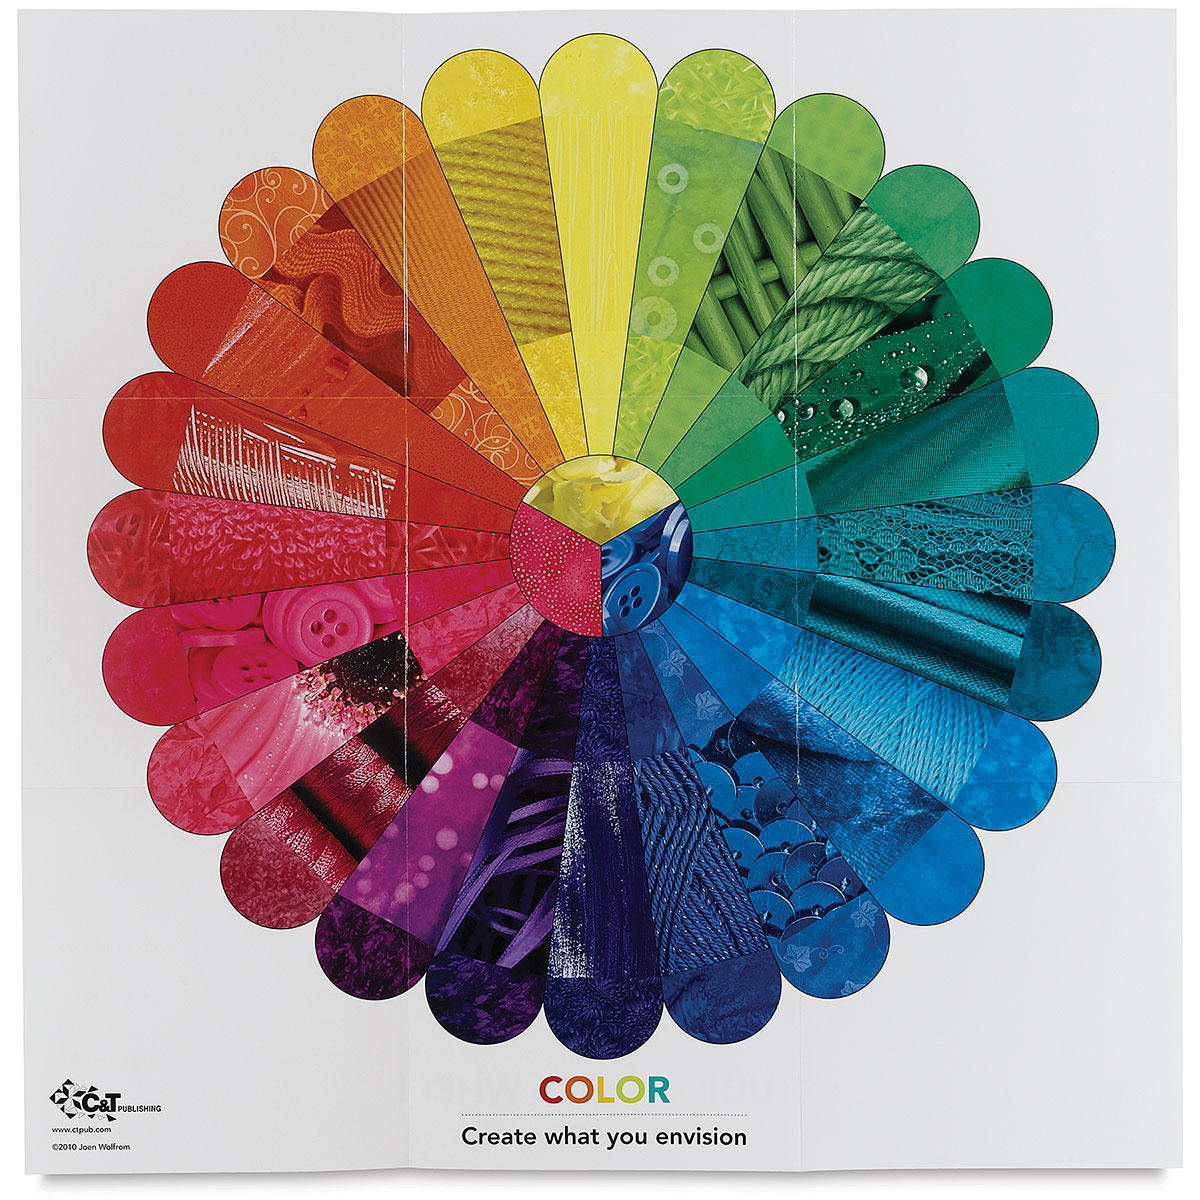 Crystal Productions Student Color Wheel Poster 